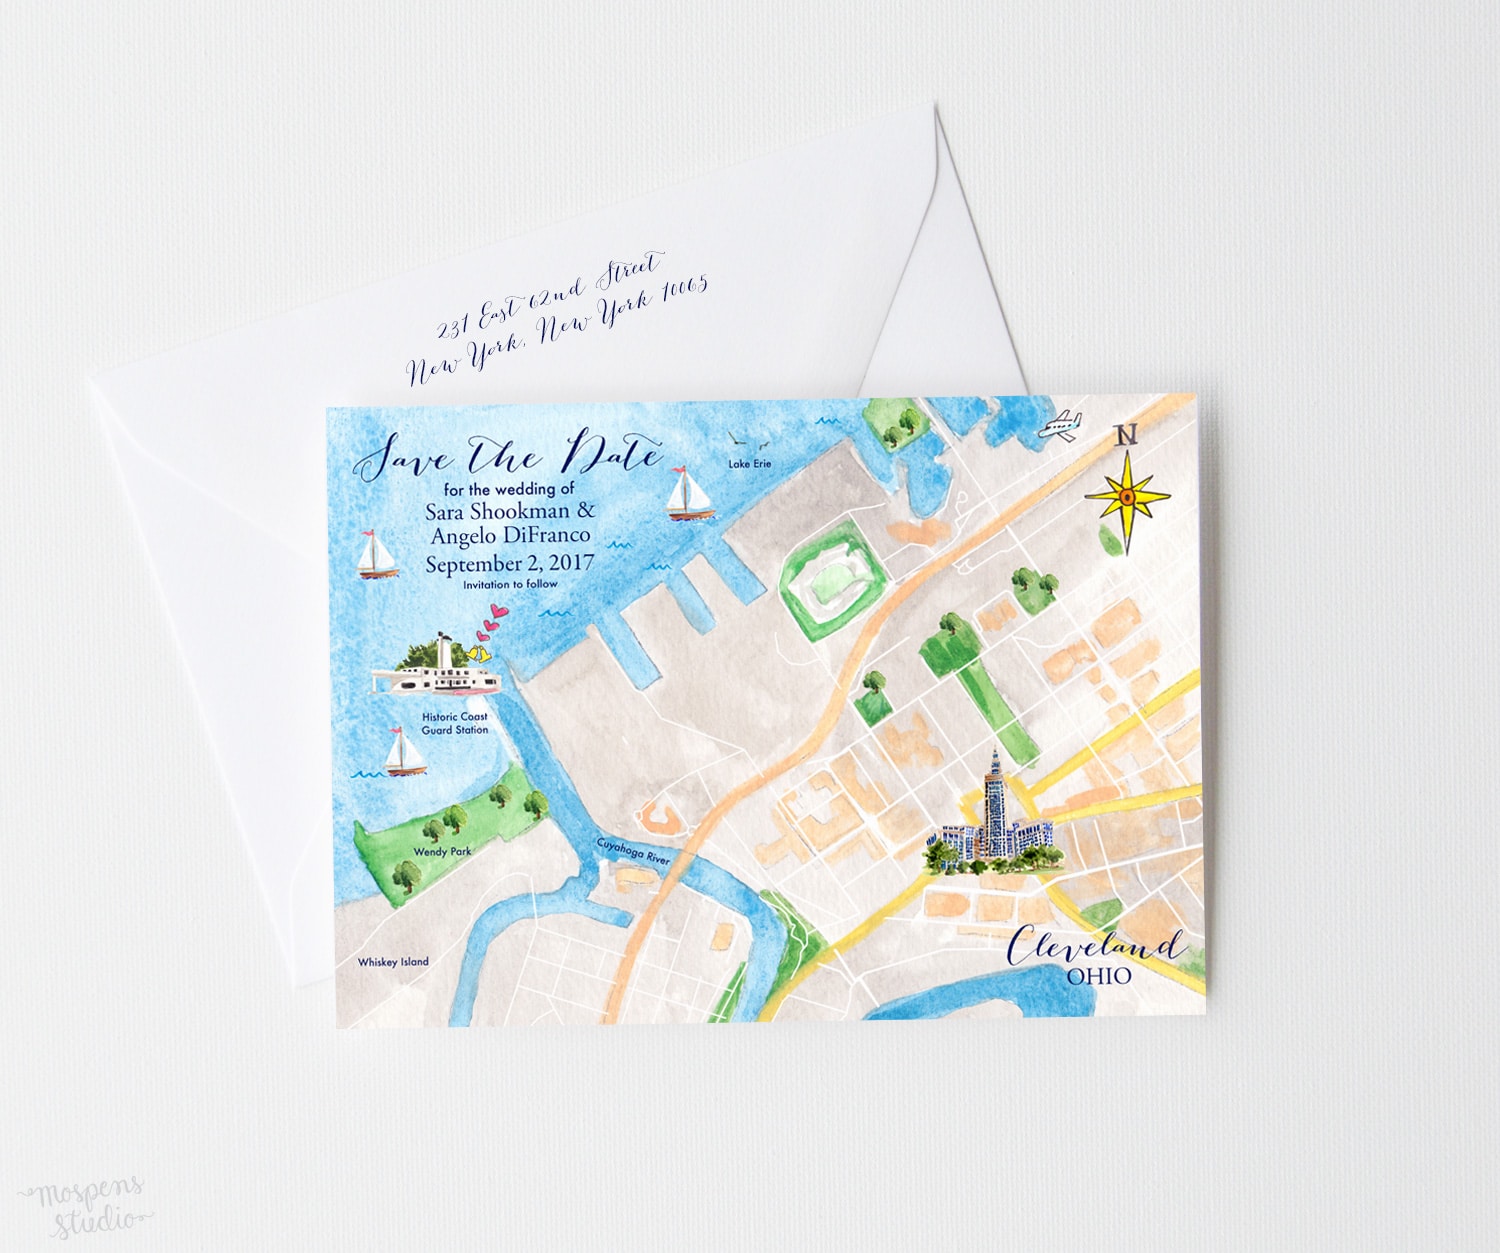 27 Sea-worthy Nautical Wedding Invitations. Illustrated watercolor Cleveland Ohio wedding map save the date cards by artist Michelle Mospens. - Mospens Studio